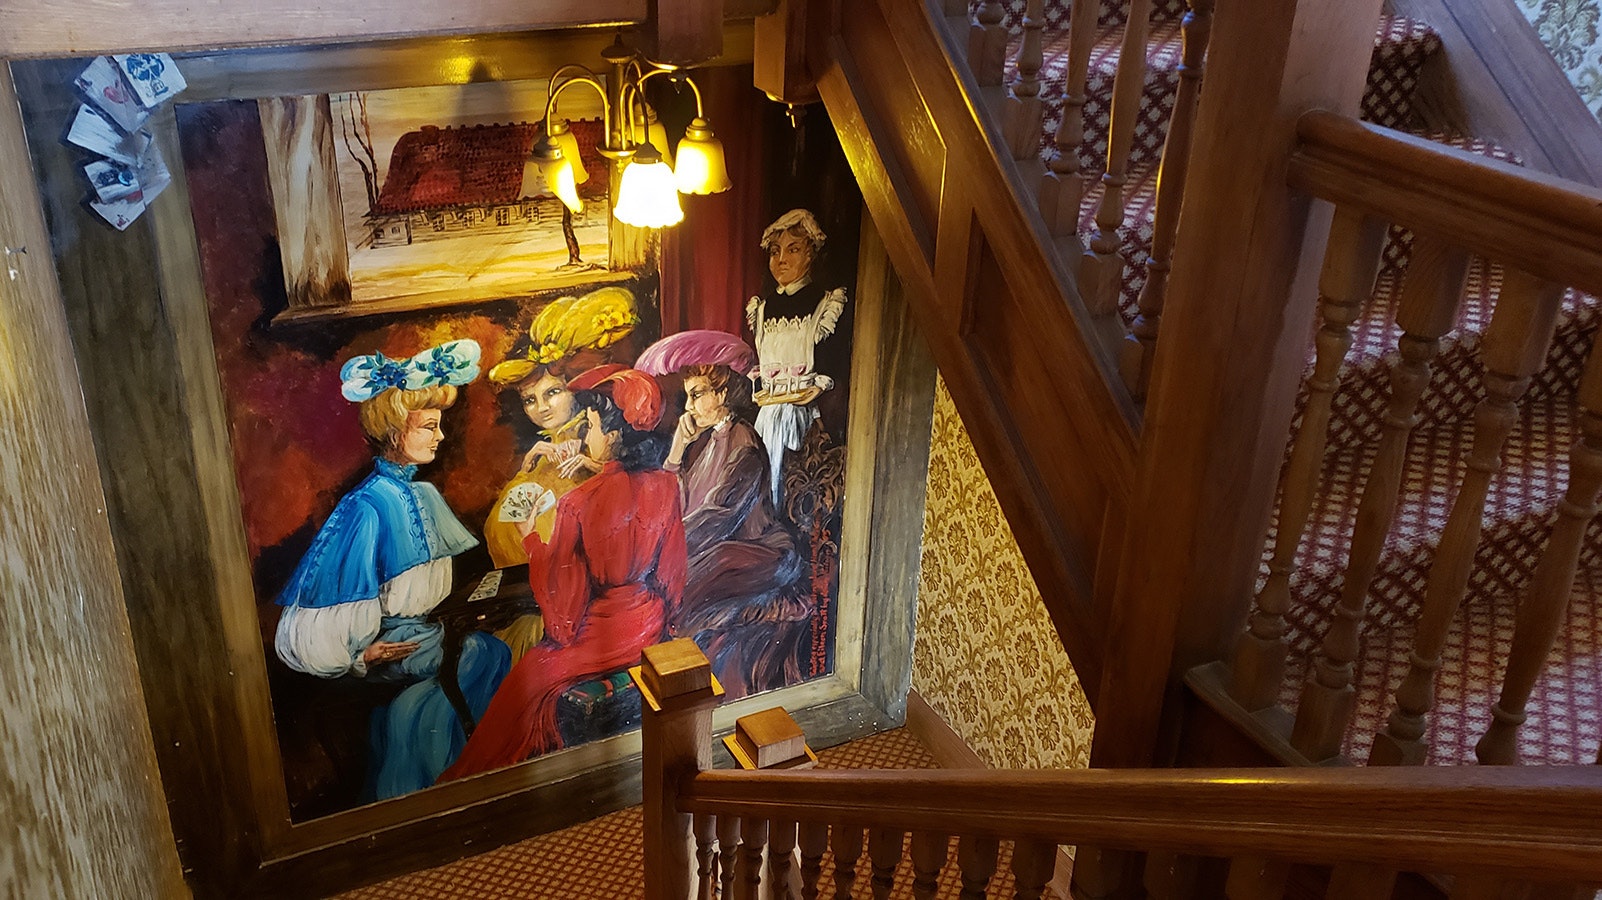 A large painting in the stairwell shows Scott family members about to enjoy wine while playing cards.